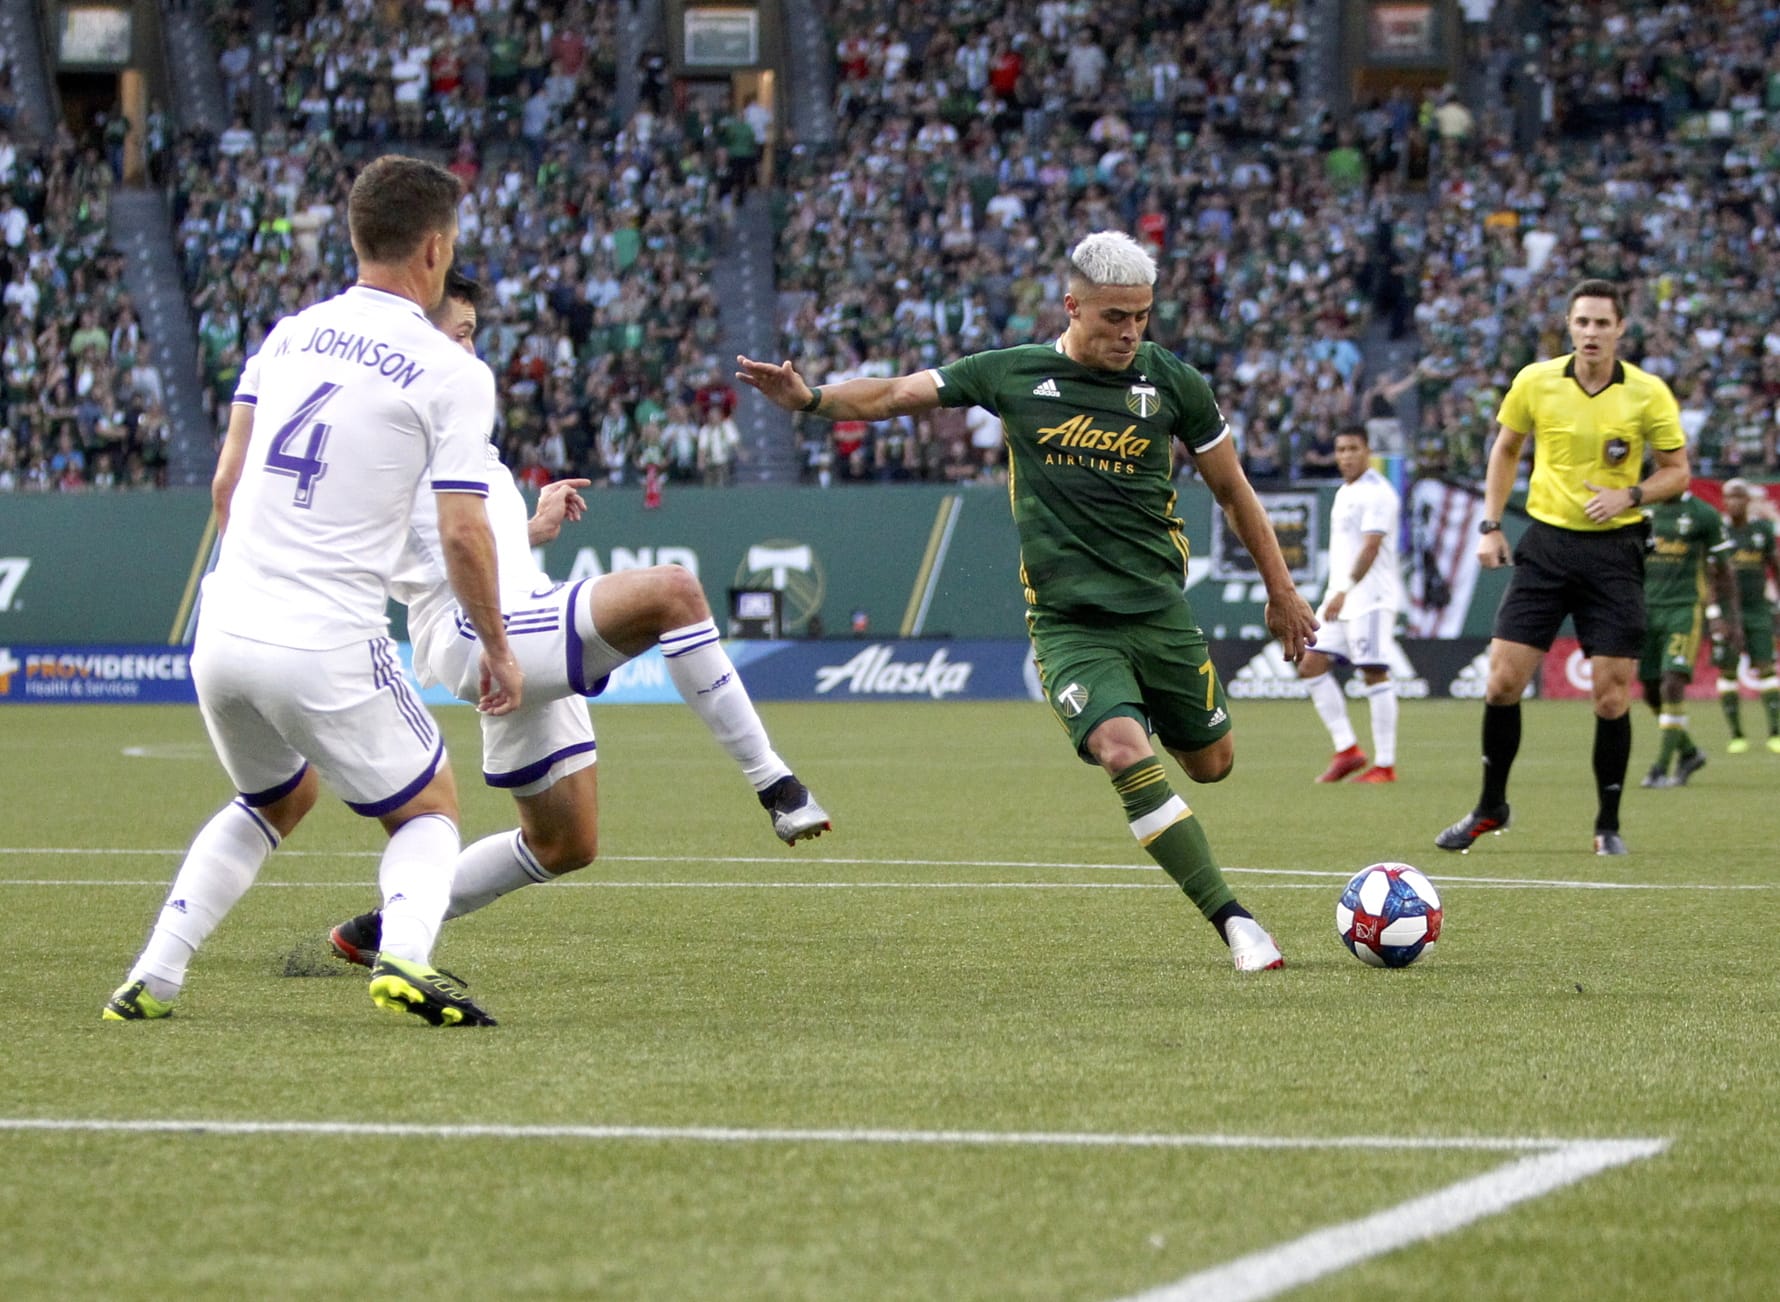 Portland Timbers' Brian Fernandez attempts a shot on goal as Orlando City players, including Will Johnson (4), defend during an MLS soccer match Thursday, July 18, 2019, in Portland, Ore.